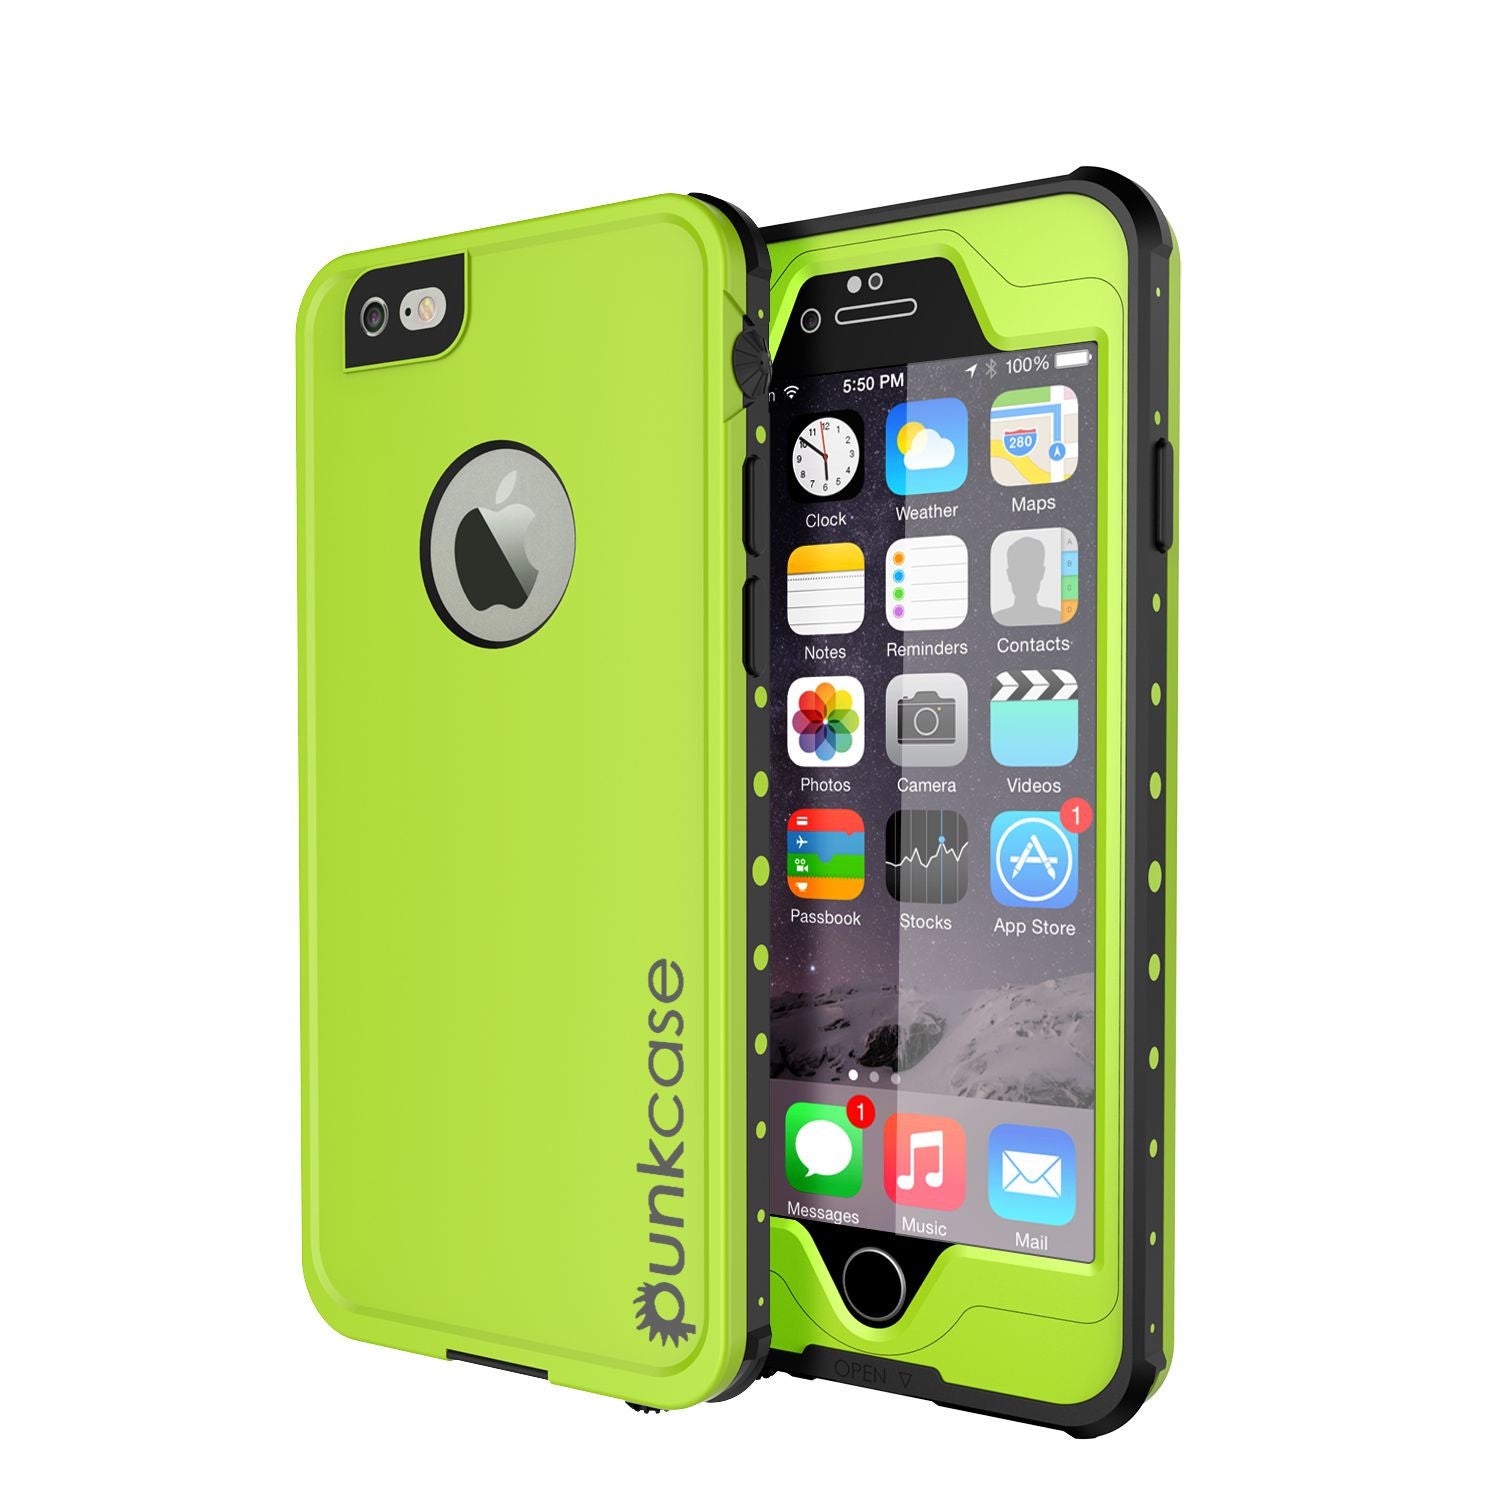 iPhone 6S+/6+ Plus Waterproof Case, PUNKcase StudStar Light Green w/ Attached Screen Protector (Color in image: black)